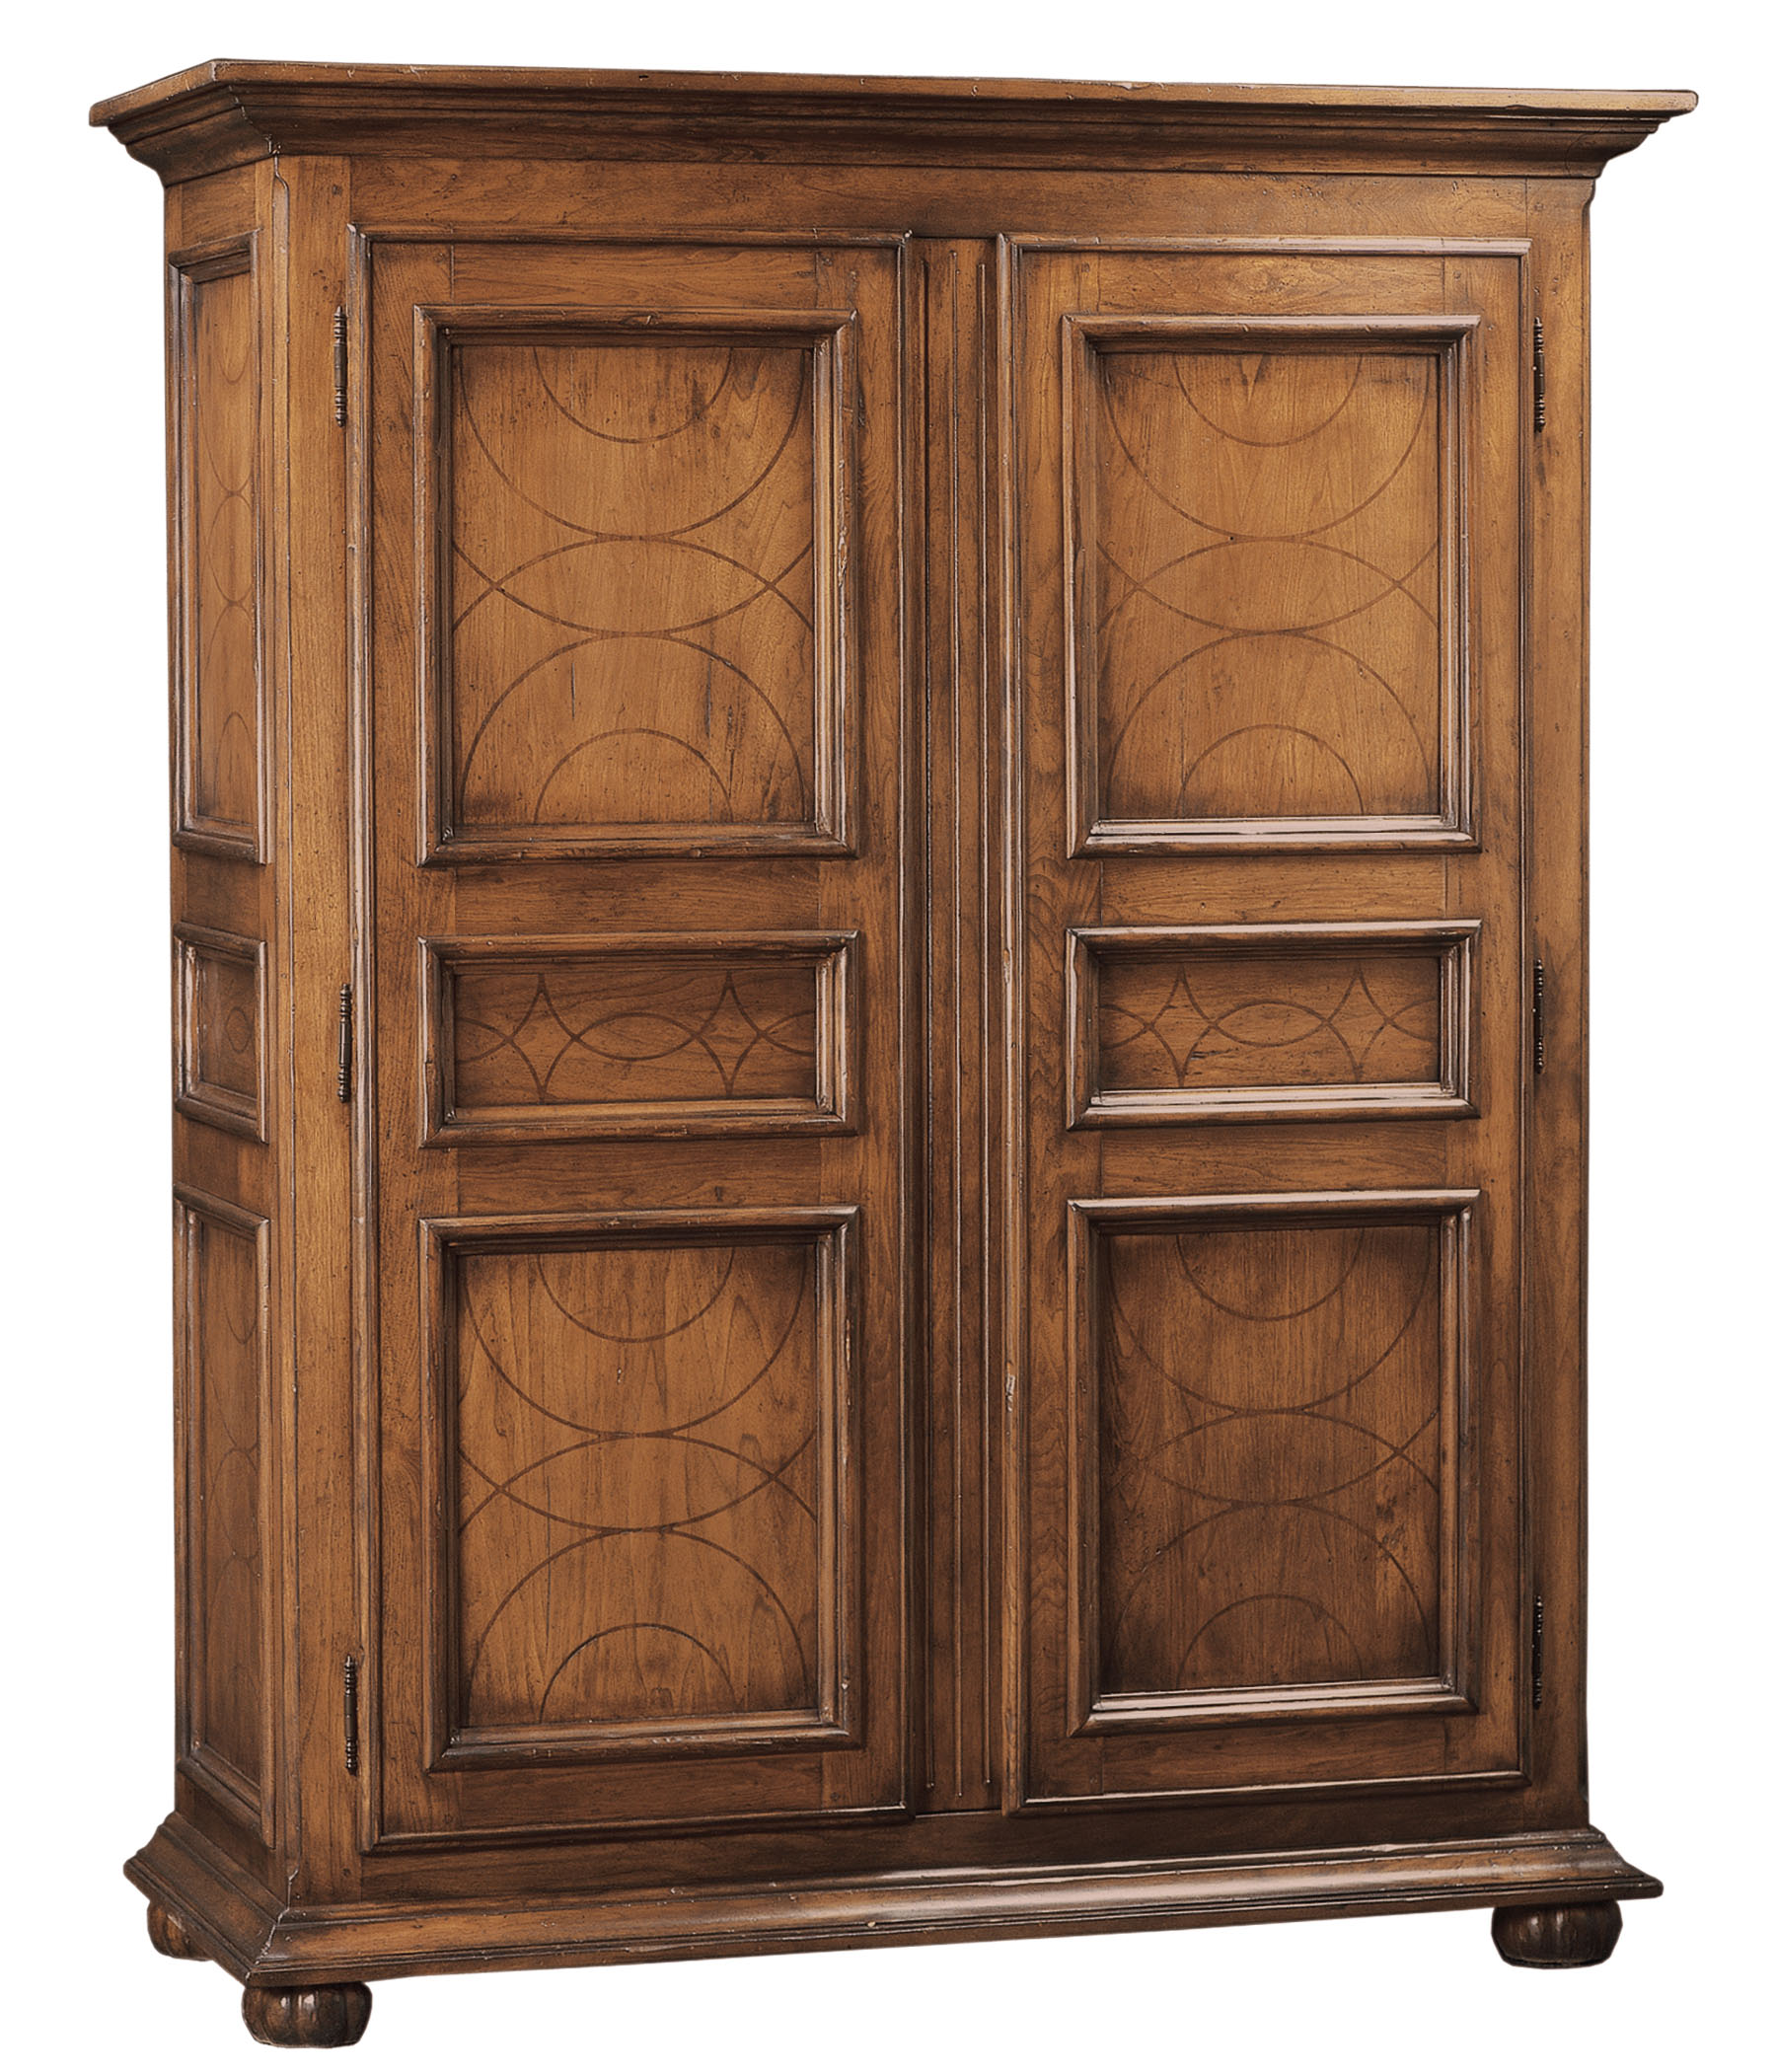 Elmore traditional transitional armoire cabinet with oval decorative detail in door panels by Woodland furniture in Idaho Falls USA